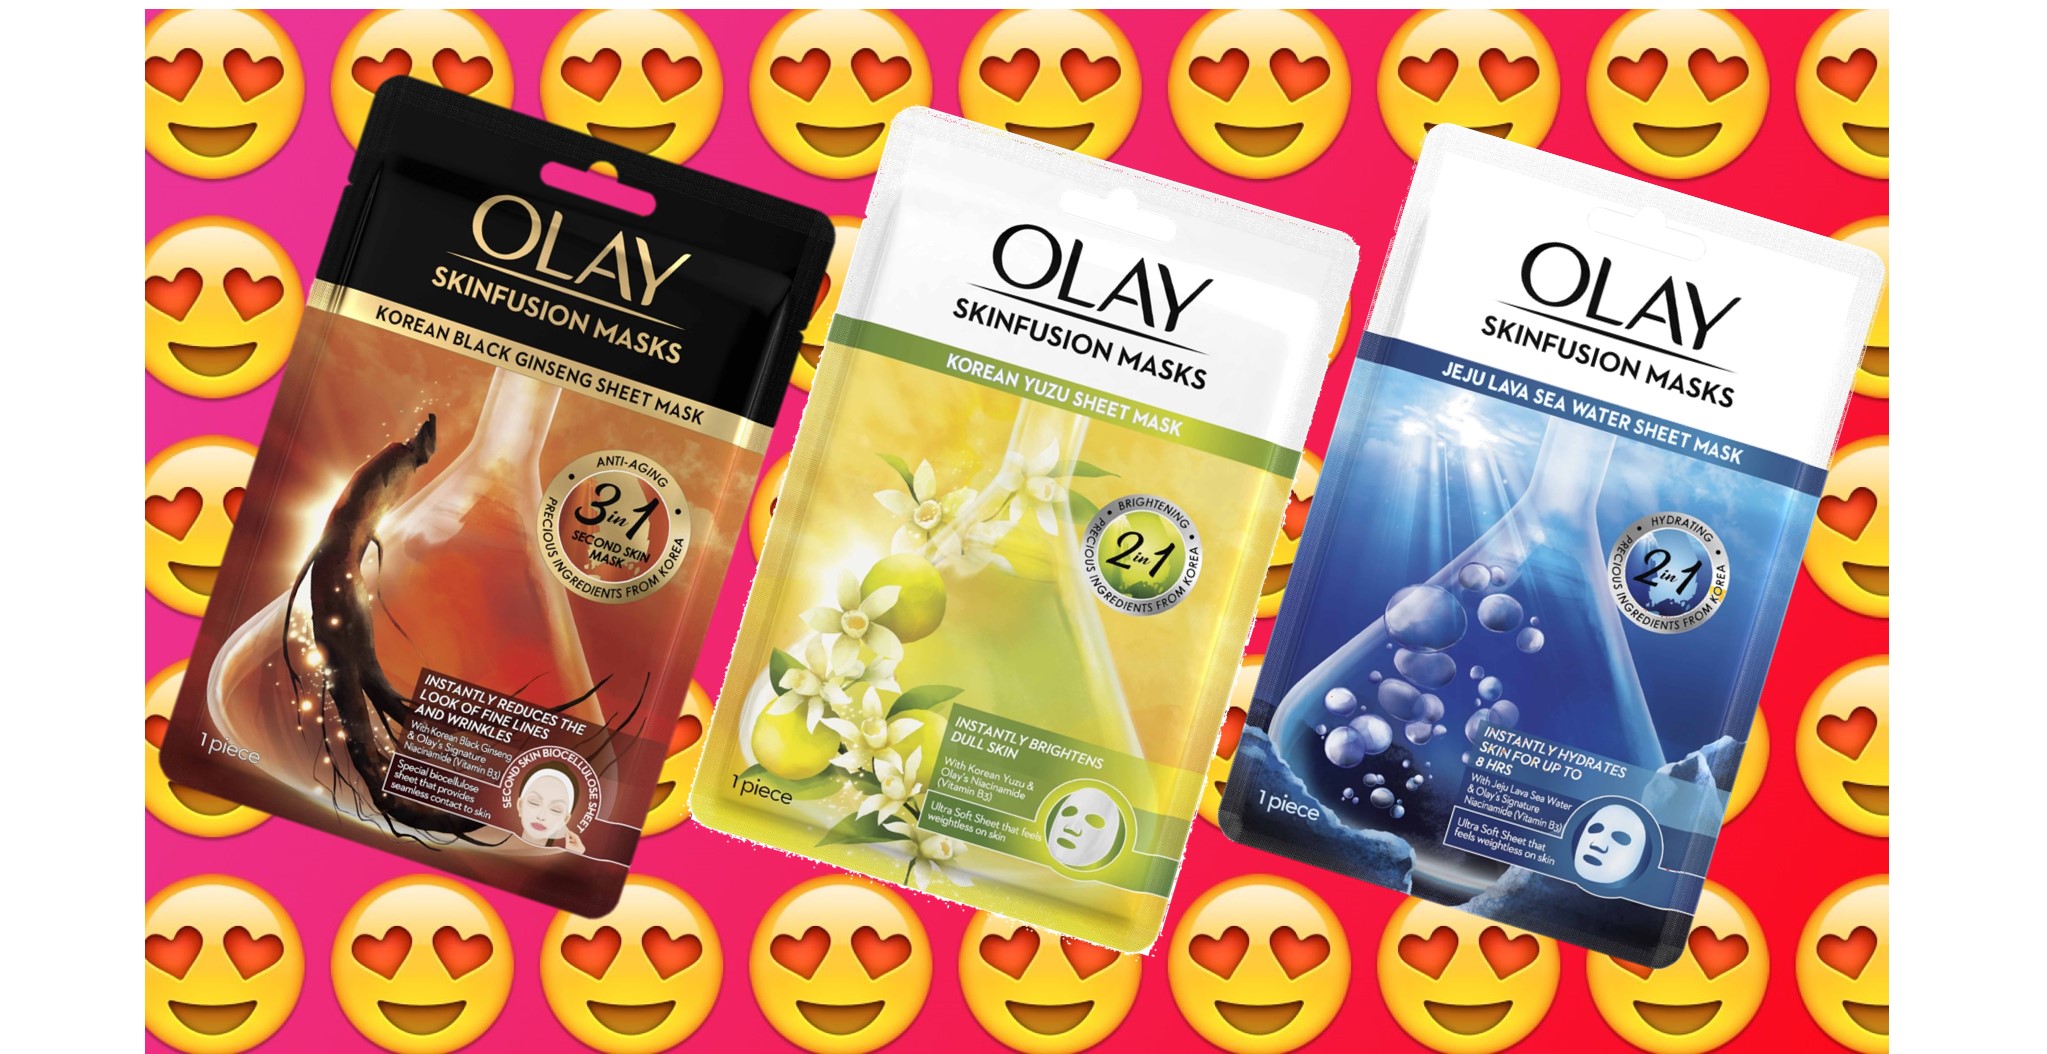 Olay’s newest Korean sheet masks feel like a K-drama glow-up experience from home